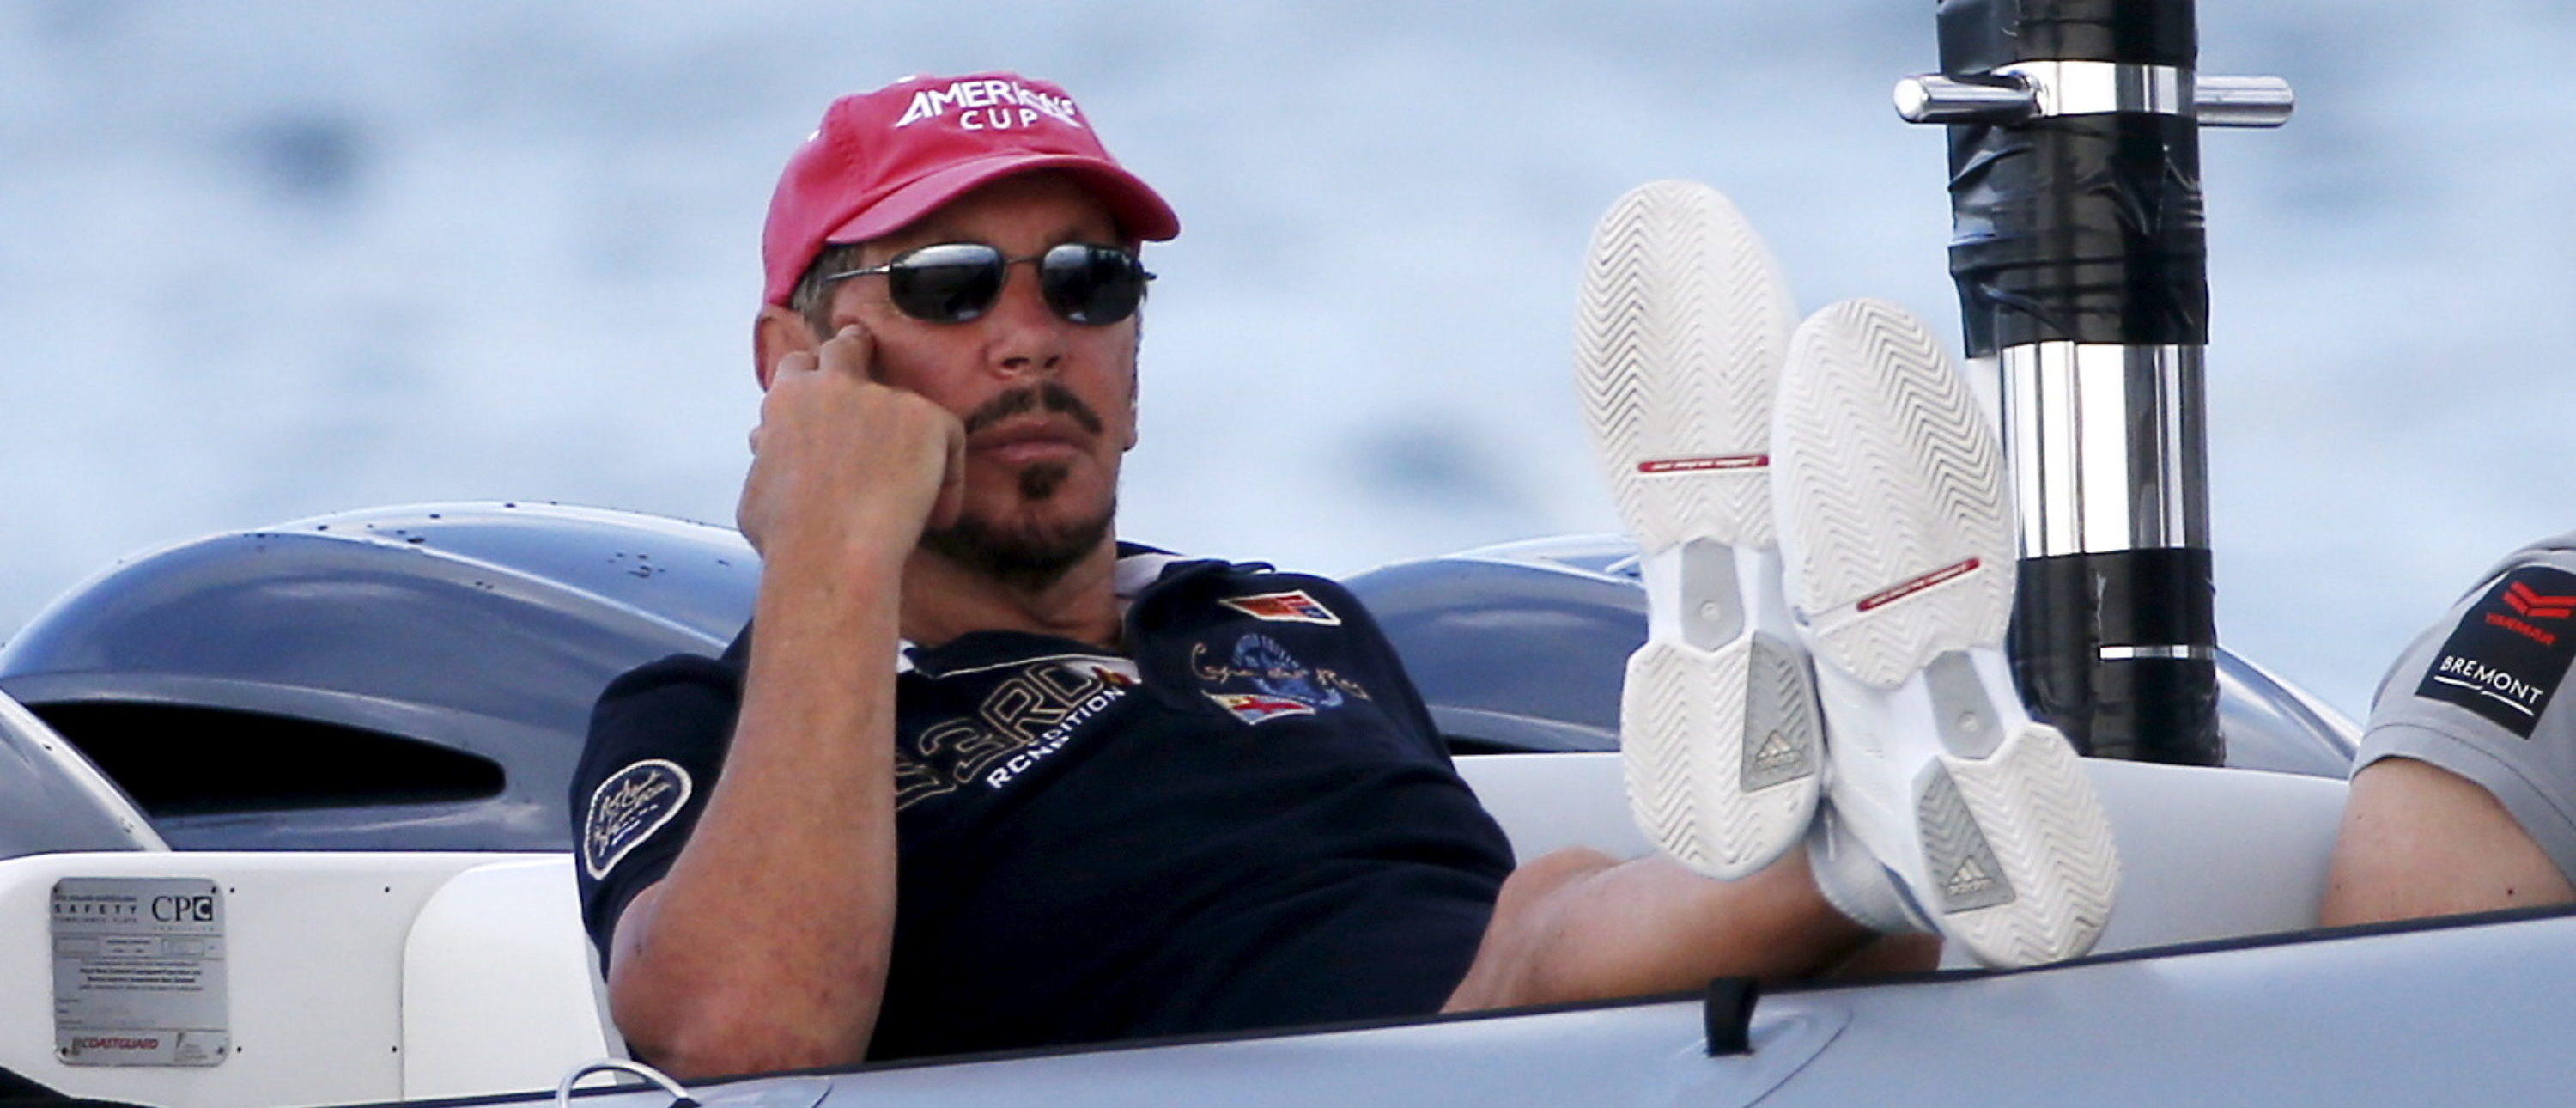 Larry Ellison, founder and former CEO of Oracle Inc. watches a training race from a motor boat ahead of the America's Cup World Series sailing competition on the Great Sound in Hamilton, Bermuda, October 16, 2015. REUTERS/Mike Segar